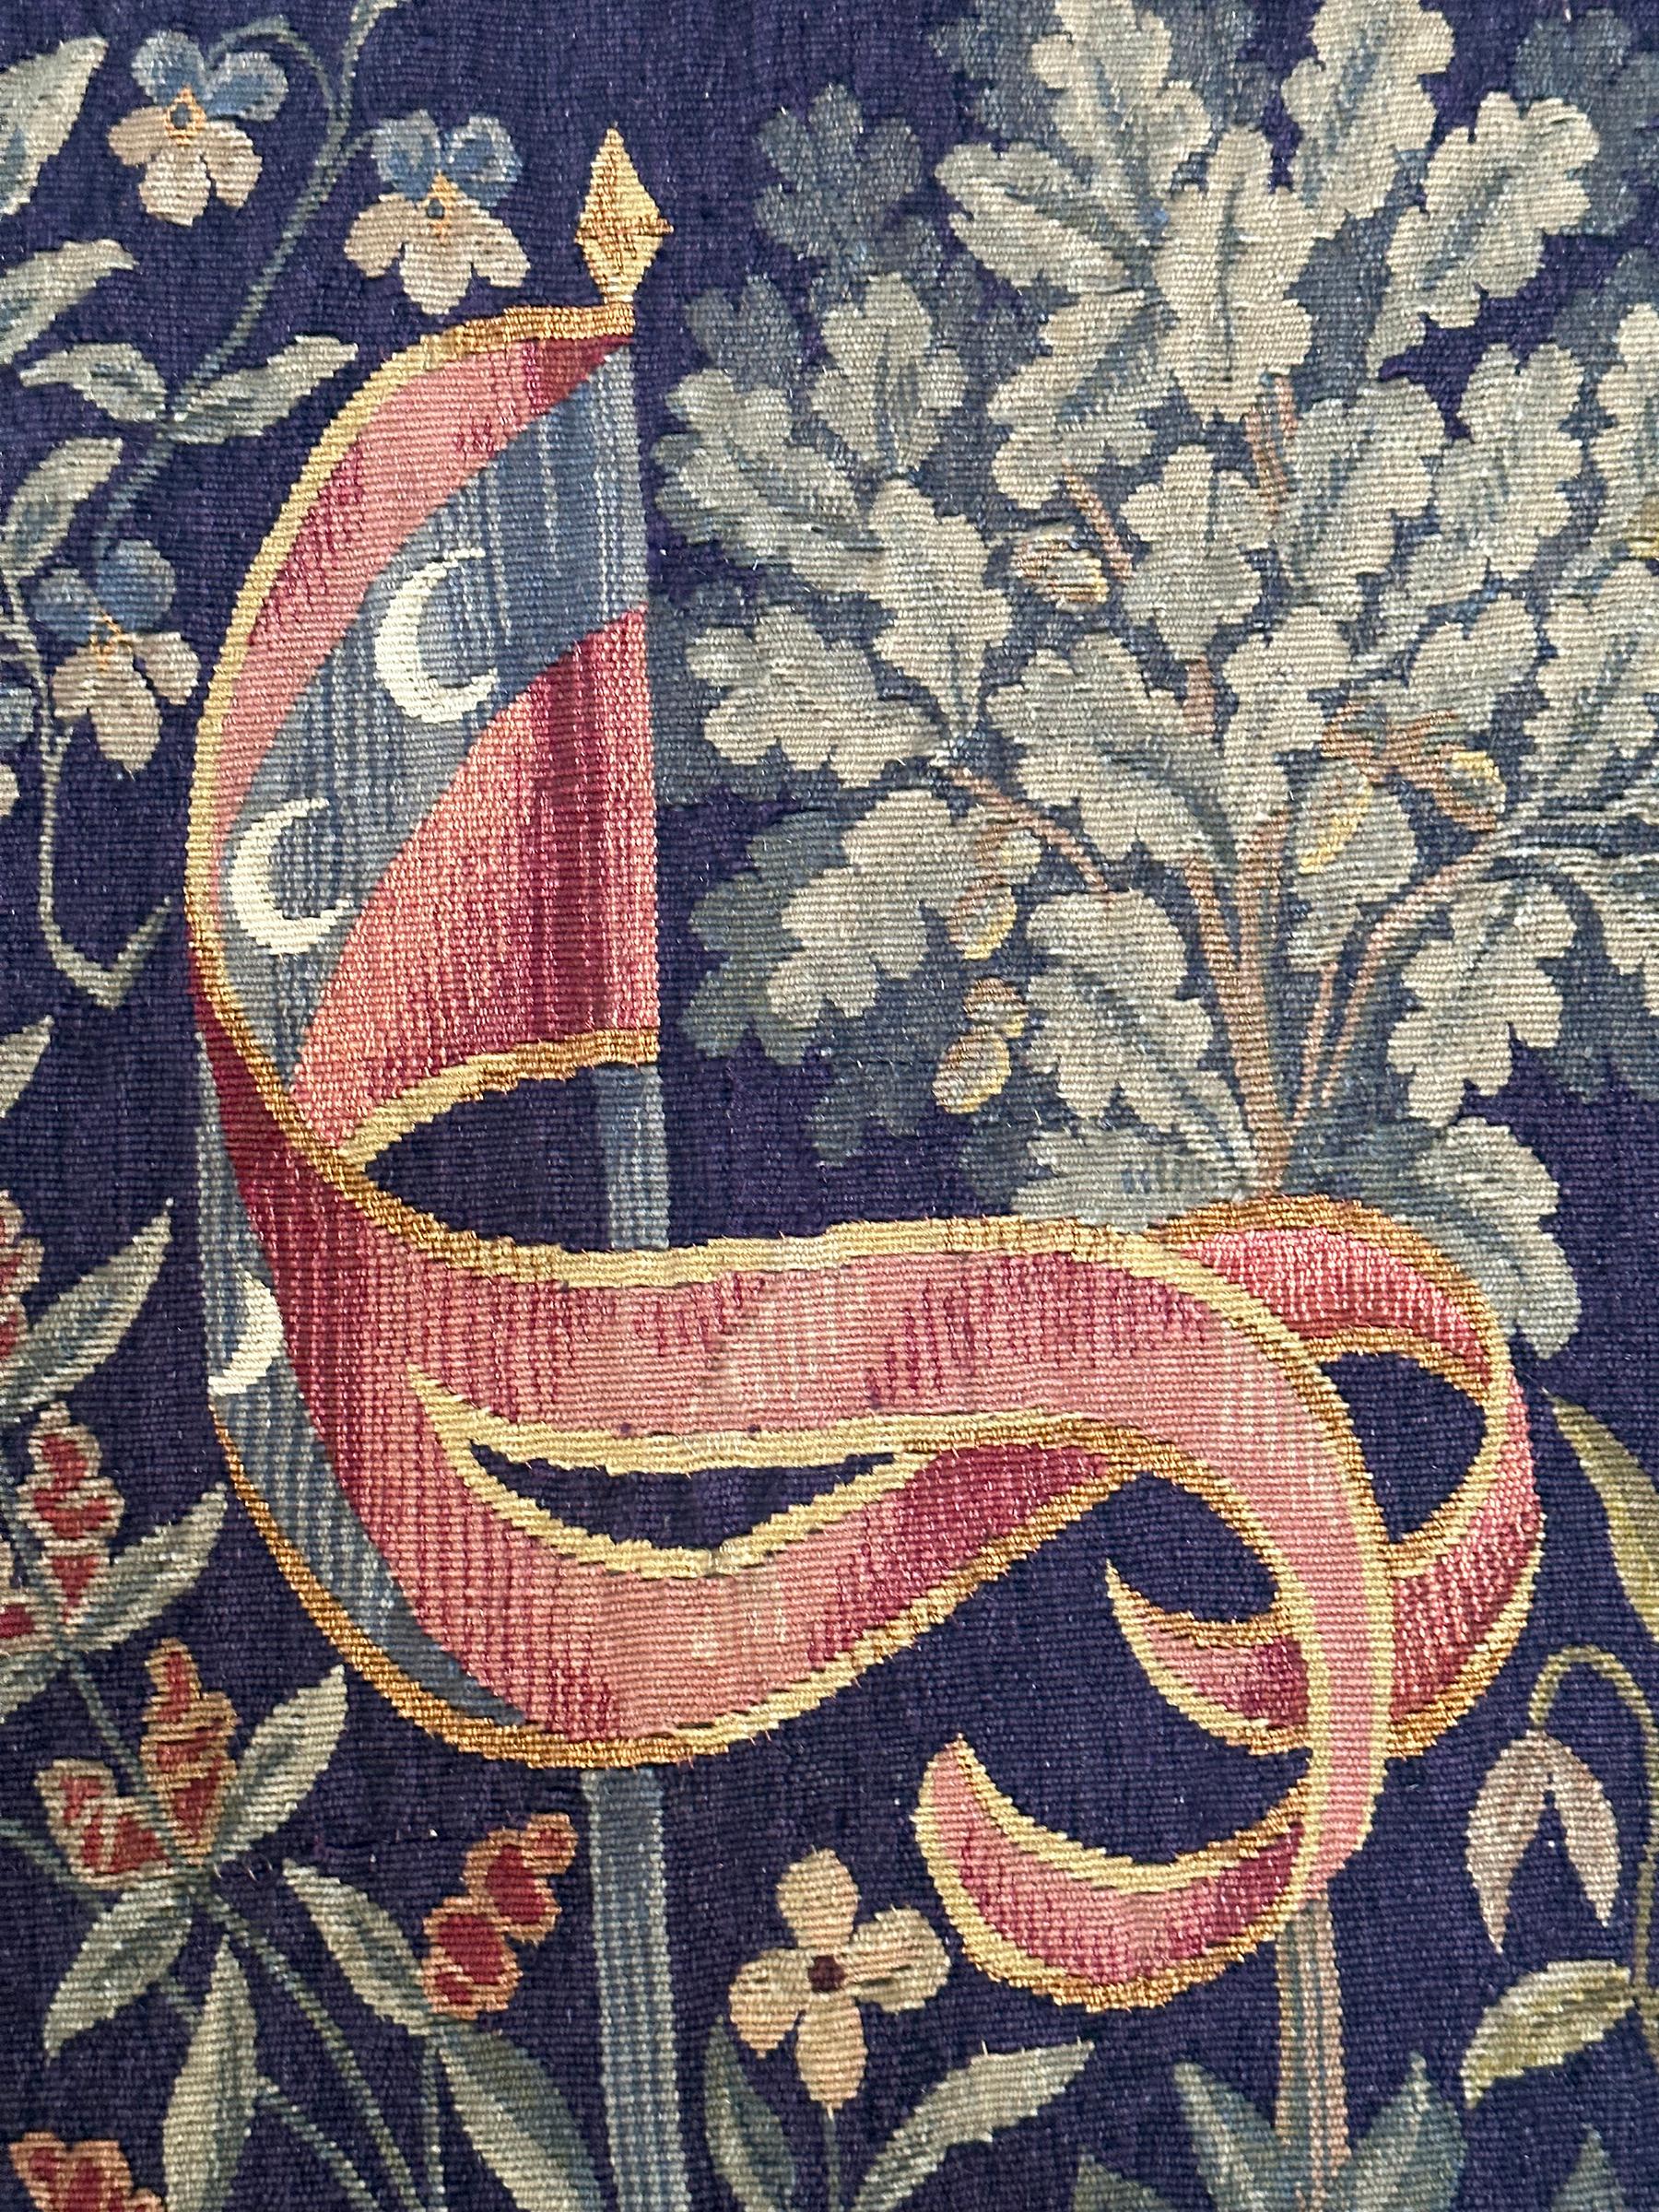 Antique French Aubusson Tapestry Rare Wool & Silk Renaissance 4x5 1890 132x155cm For Sale 2